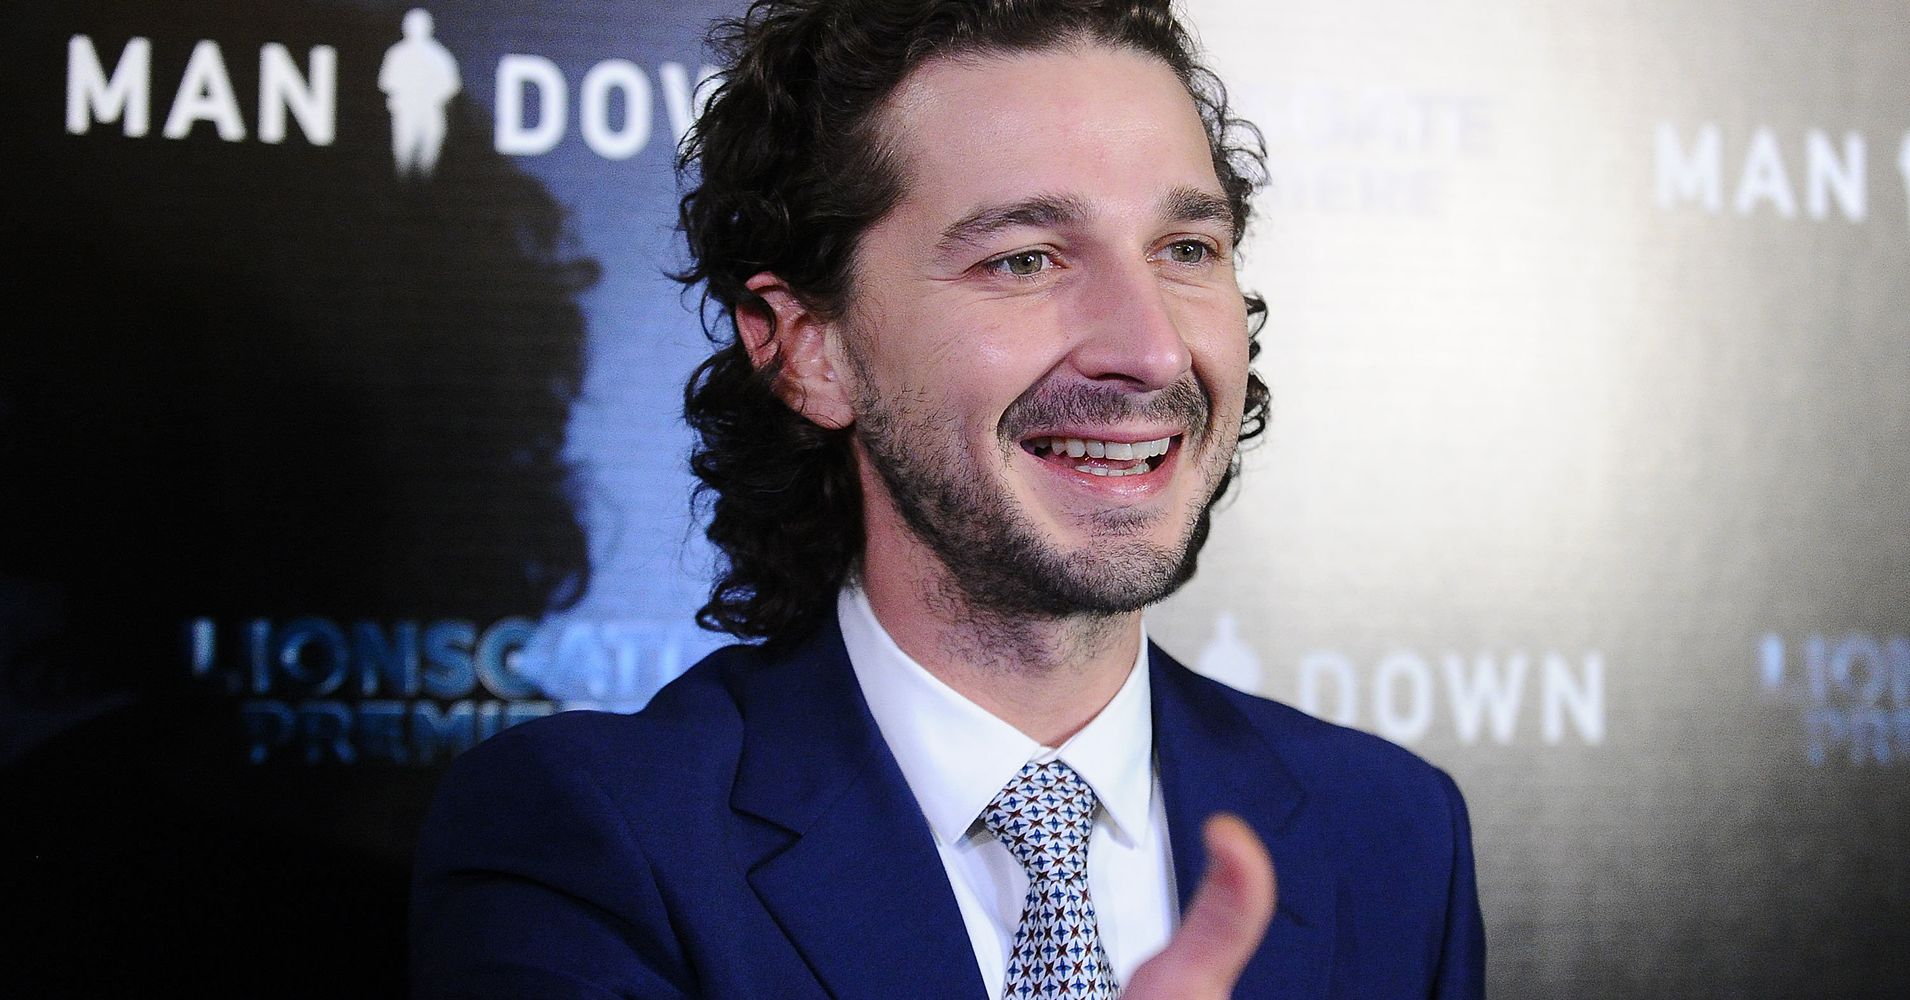 Shia LaBeouf Movie 'Man Down' Sells Just 1 Ticket In The U.K. | HuffPost